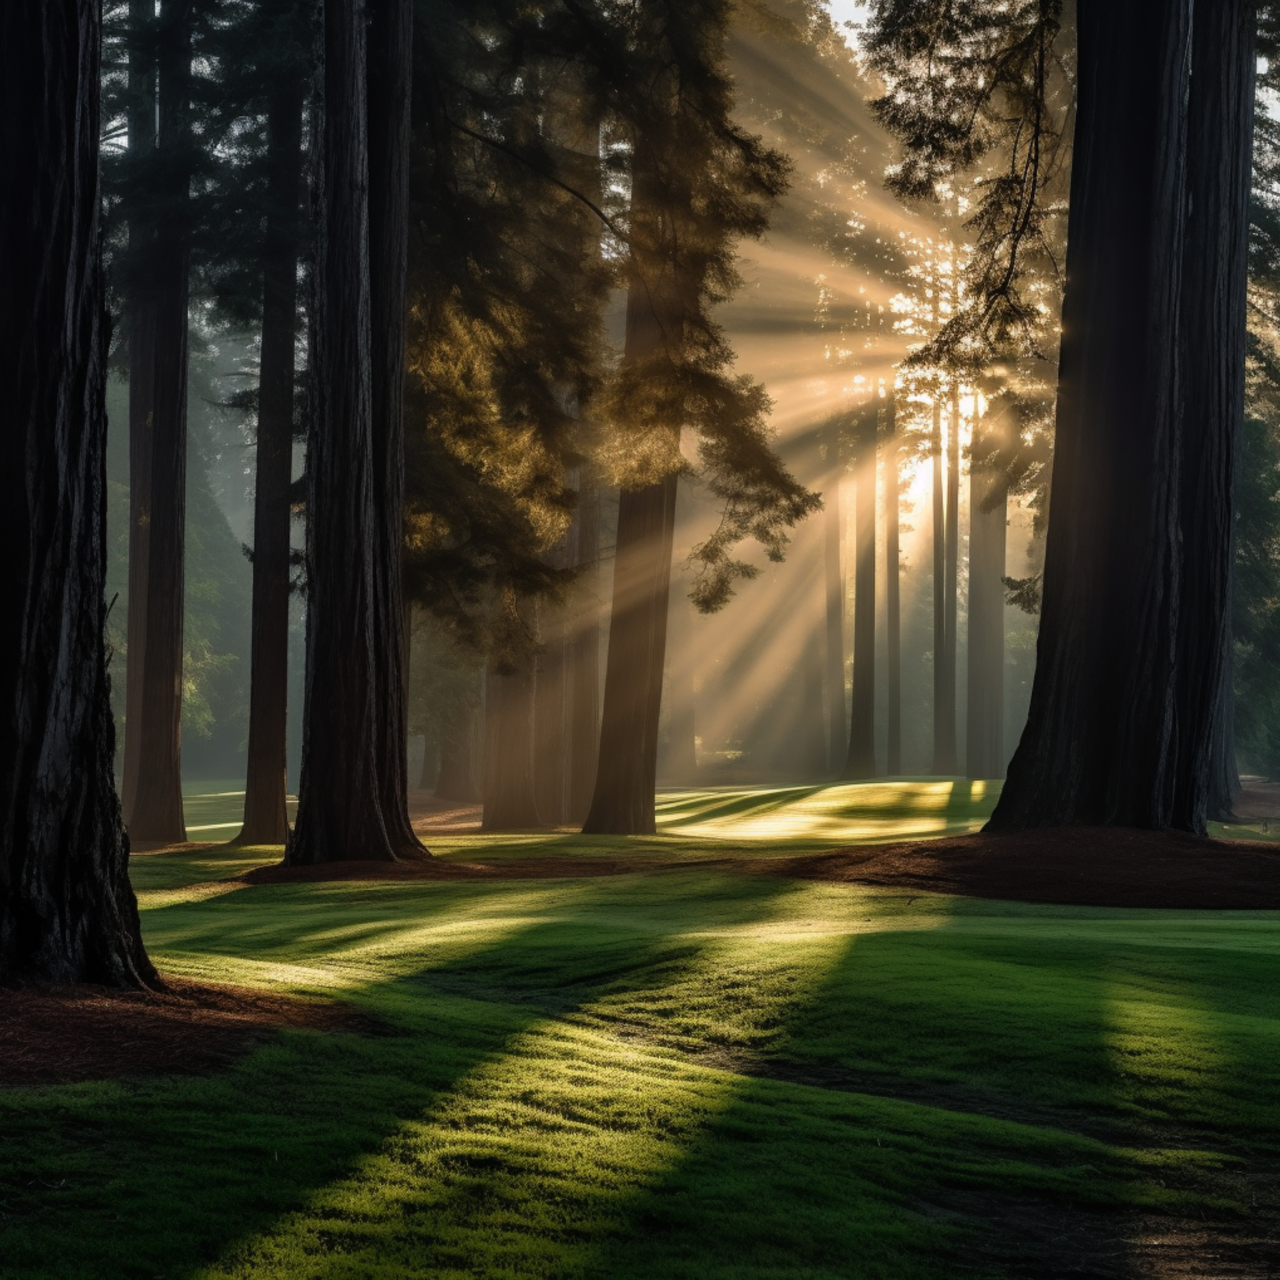 Sun rising with slight fog presenting sun rays through the Redwoods in the green fairway of a disc golf course